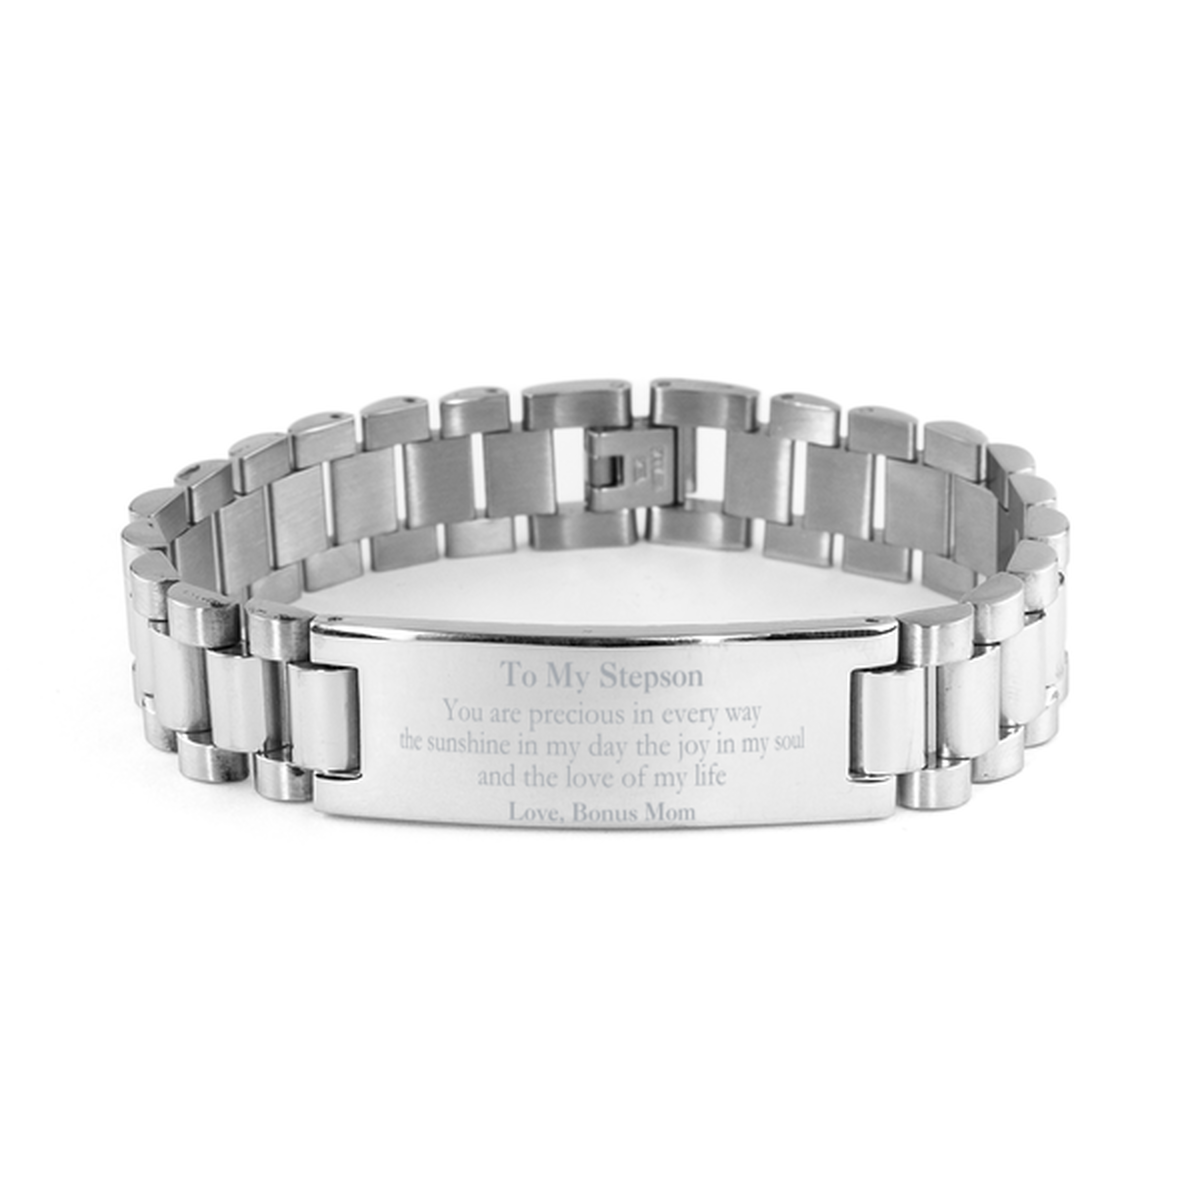 Graduation Gifts for Stepson Ladder Stainless Steel Bracelet Present from Bonus Mom, Christmas Stepson Birthday Gifts Stepson You are precious in every way the sunshine in my day. Love, Bonus Mom